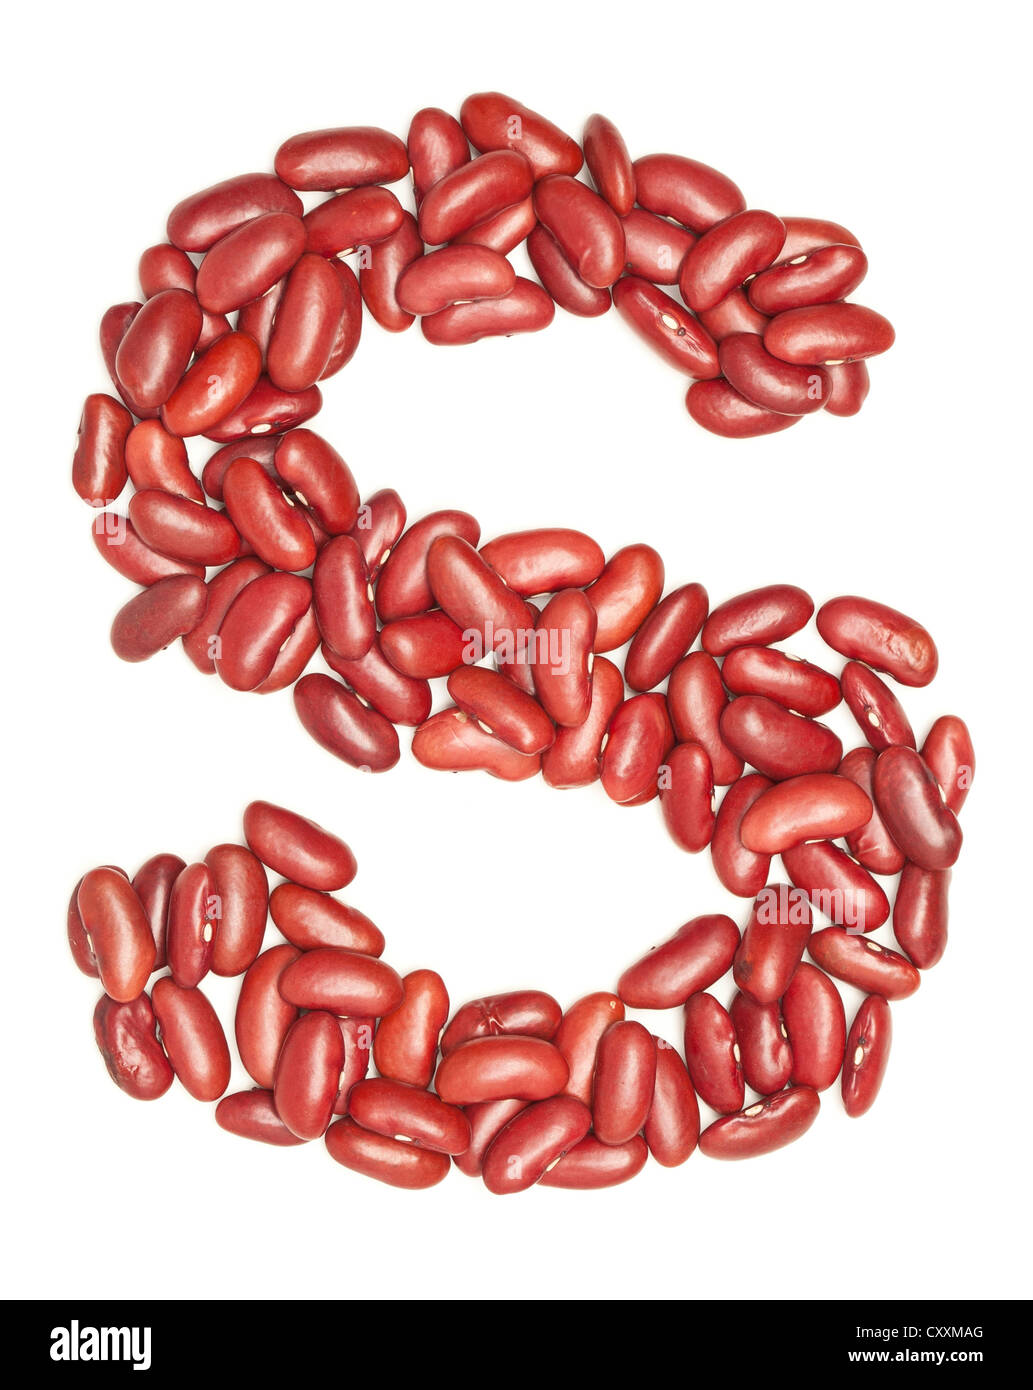 s, Alphabet from red beans. on white. Stock Photo